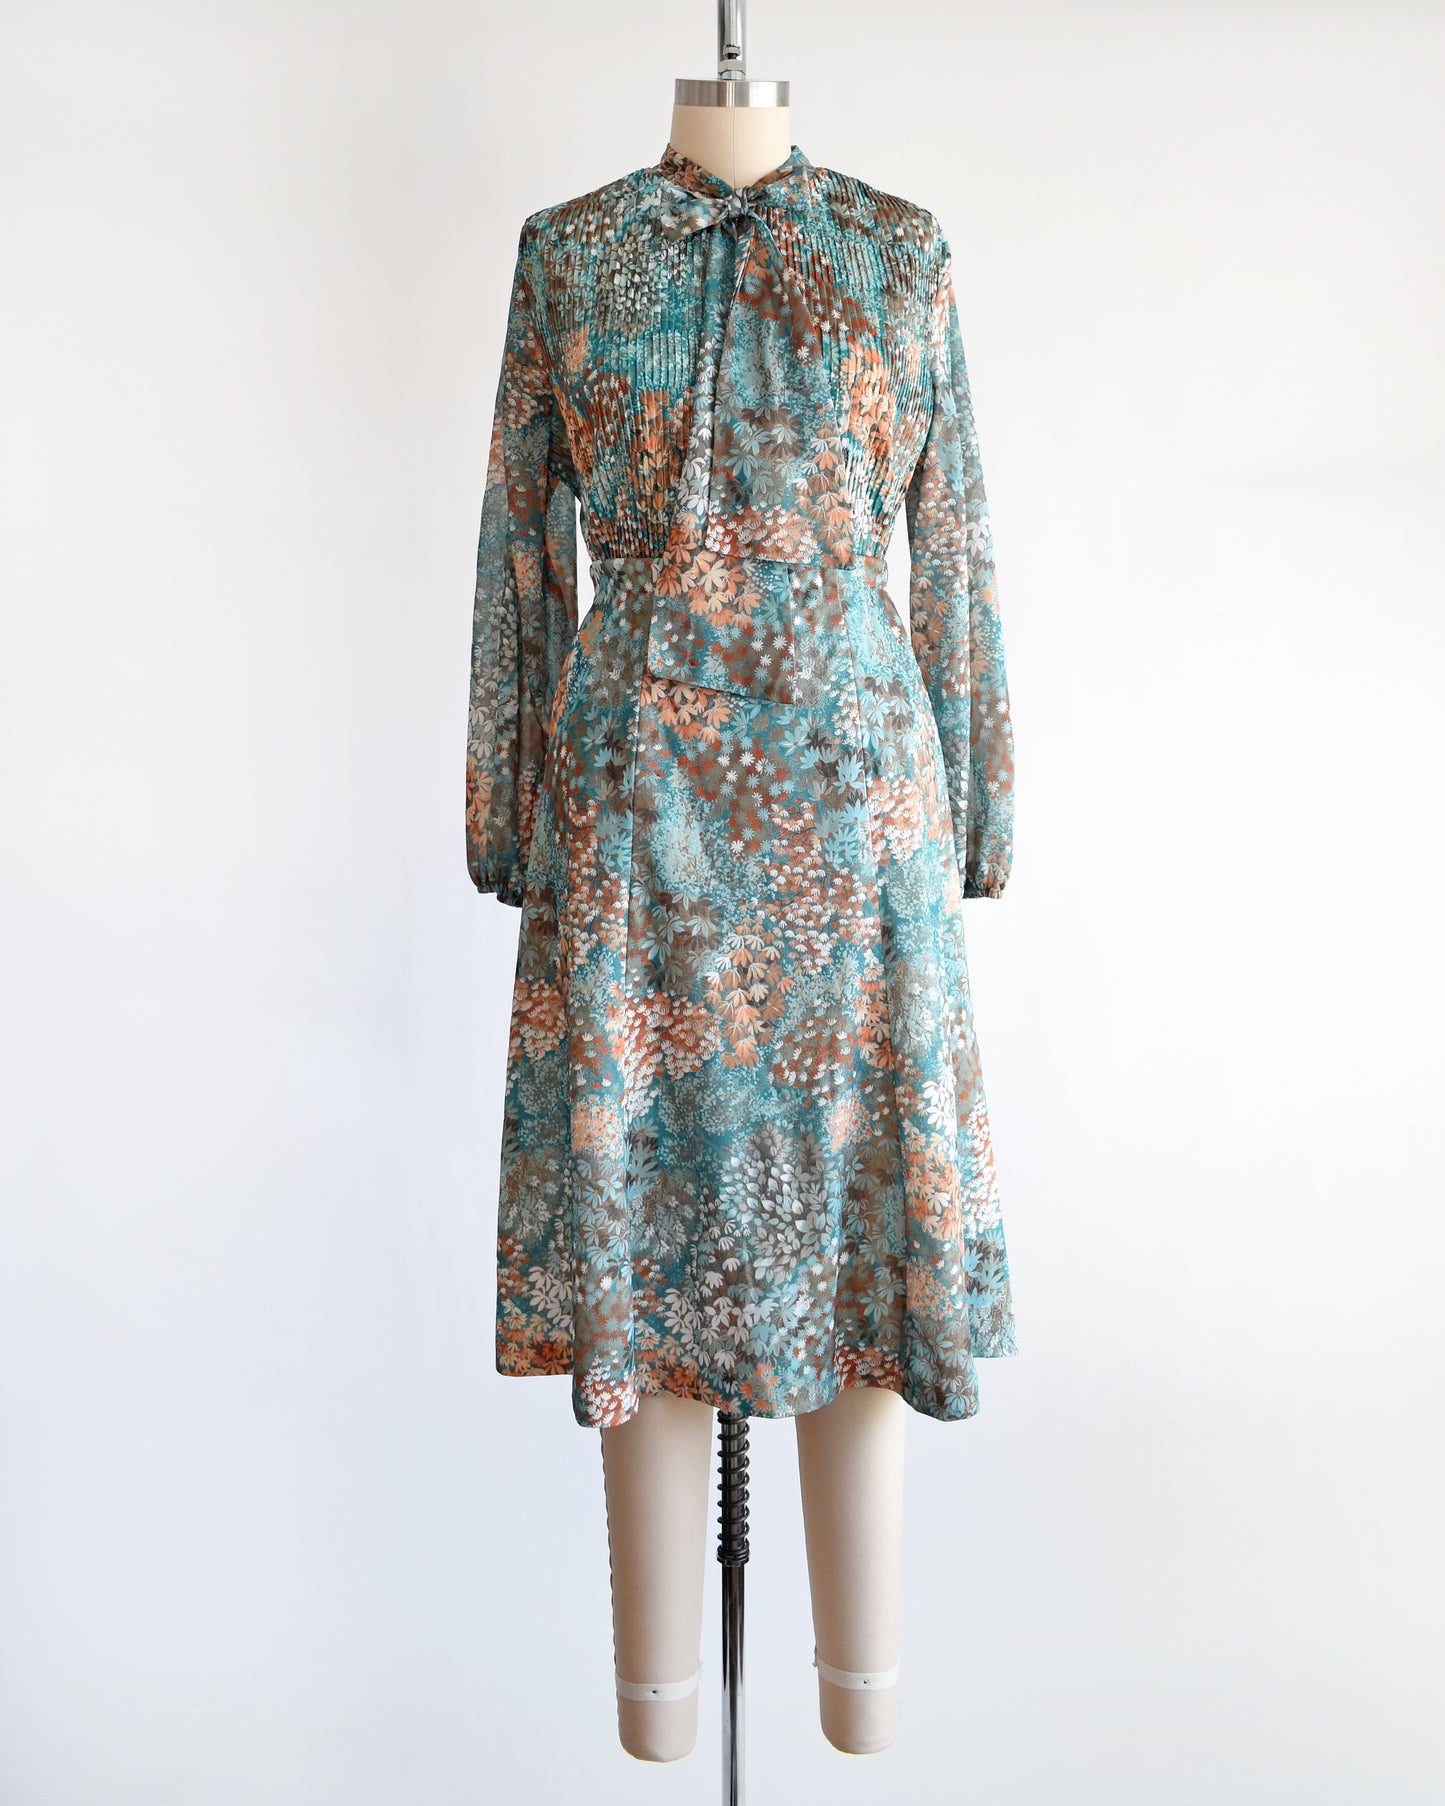 A vintage 1970s floral blue and orange floral dress set. This set comes with a matching blouse and skirt. 